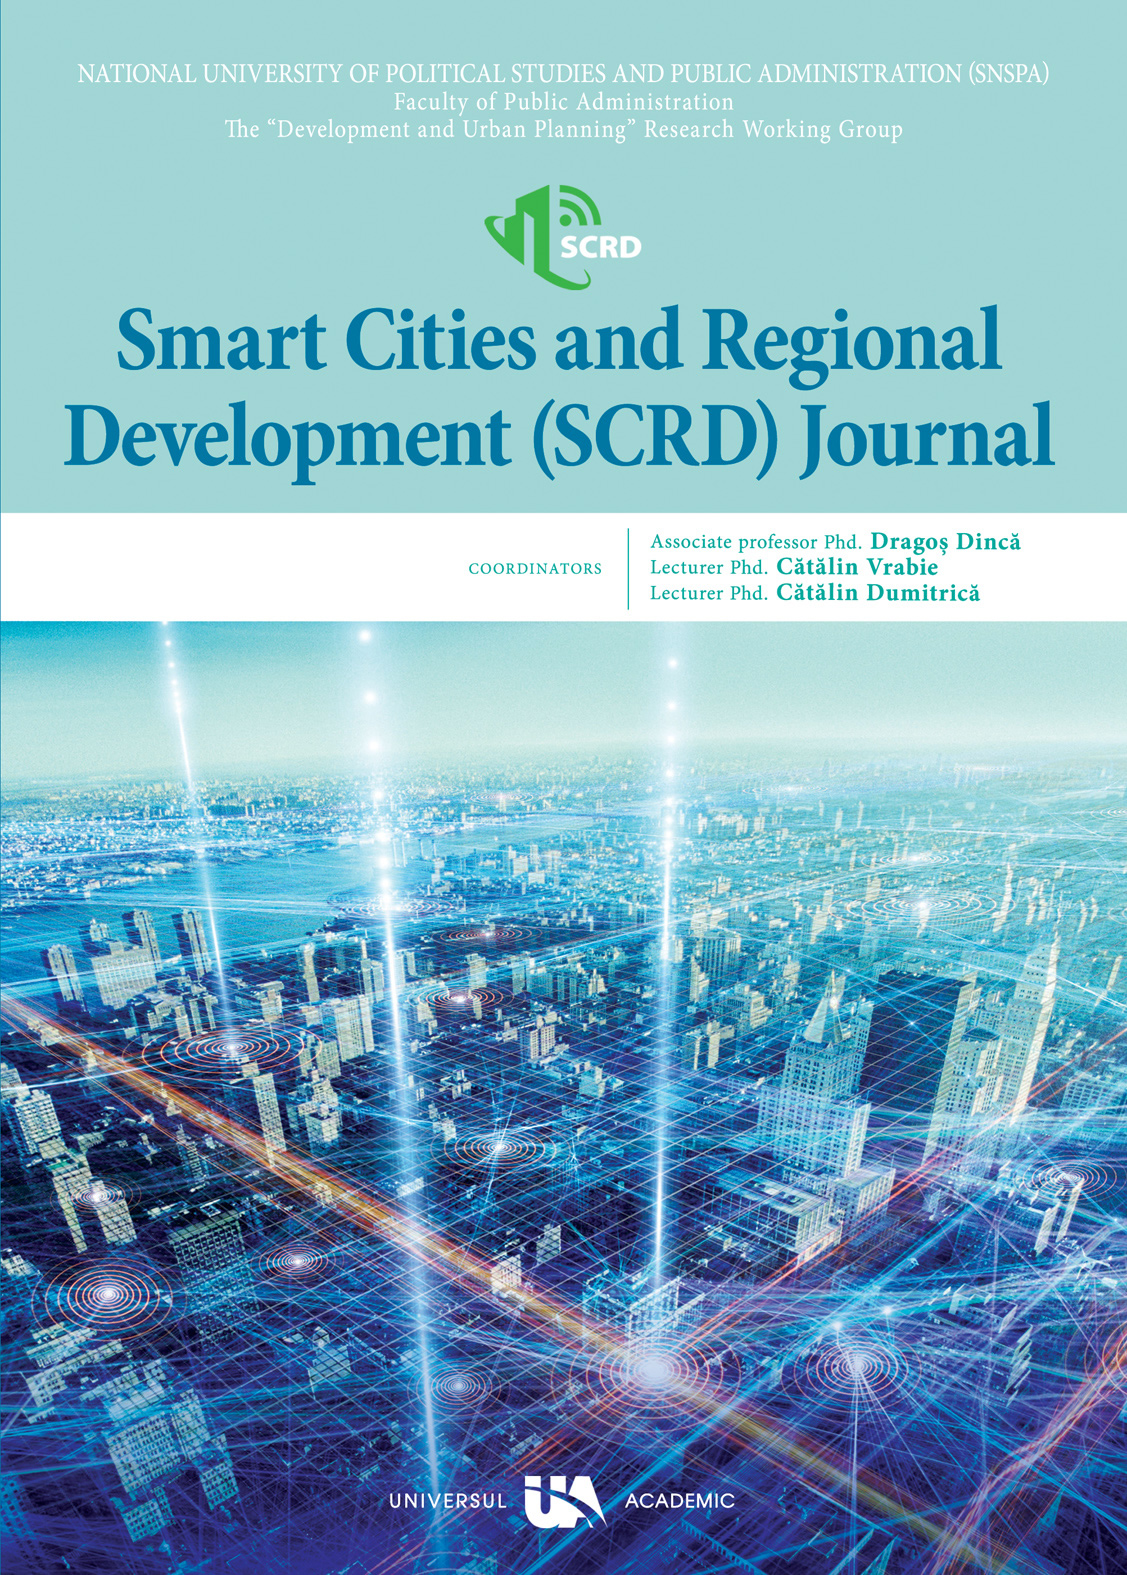 The smart cities are implemented